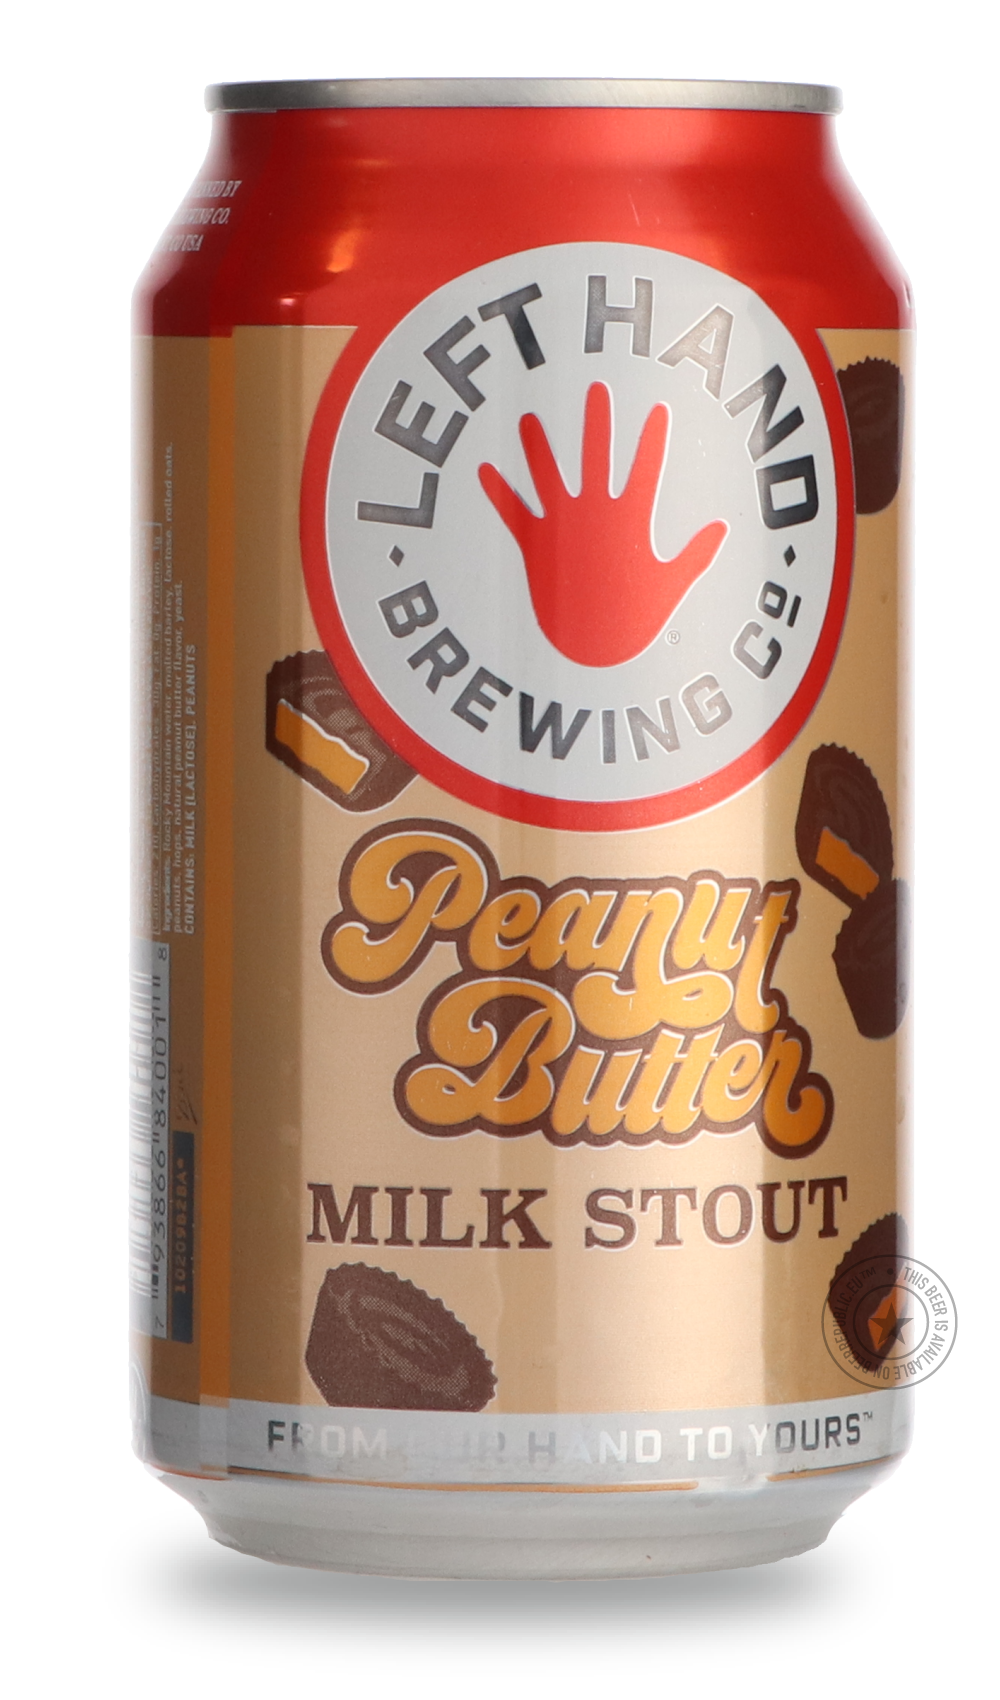 -Left Hand- Peanut Butter Milk Stout-Stout & Porter- Only @ Beer Republic - The best online beer store for American & Canadian craft beer - Buy beer online from the USA and Canada - Bier online kopen - Amerikaans bier kopen - Craft beer store - Craft beer kopen - Amerikanisch bier kaufen - Bier online kaufen - Acheter biere online - IPA - Stout - Porter - New England IPA - Hazy IPA - Imperial Stout - Barrel Aged - Barrel Aged Imperial Stout - Brown - Dark beer - Blond - Blonde - Pilsner - Lager - Wheat - We